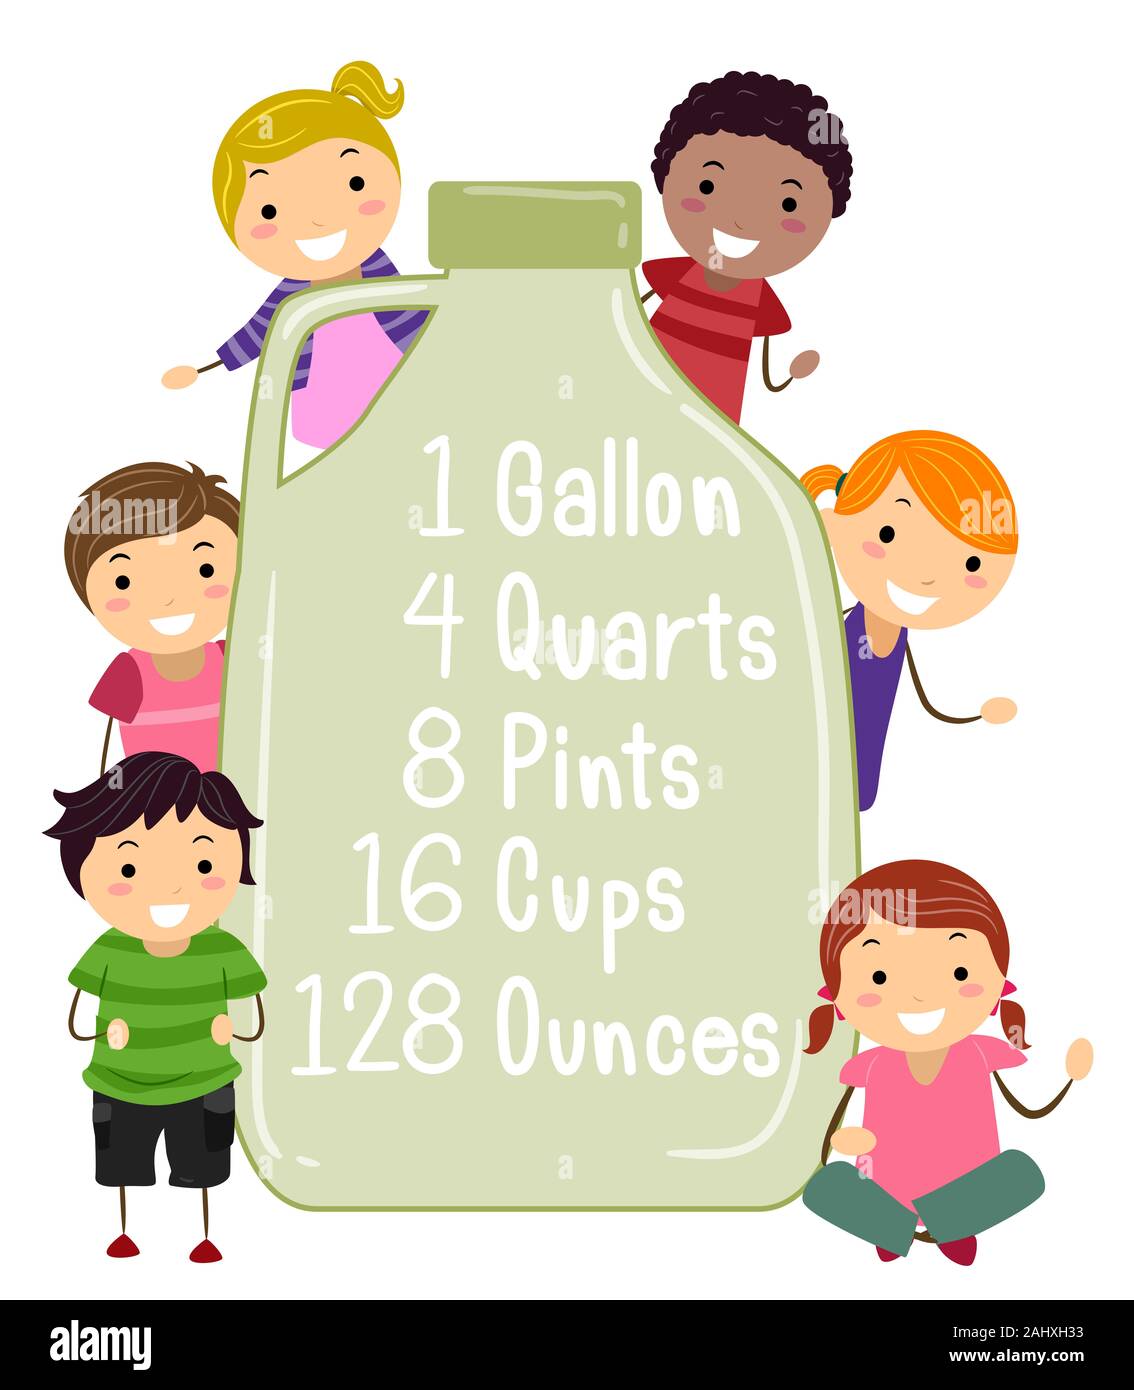 Illustration of Stickman Kids Holding a One Gallon Bottle with Conversion  from Quart, Pint, Cup to Ounce Stock Photo - Alamy